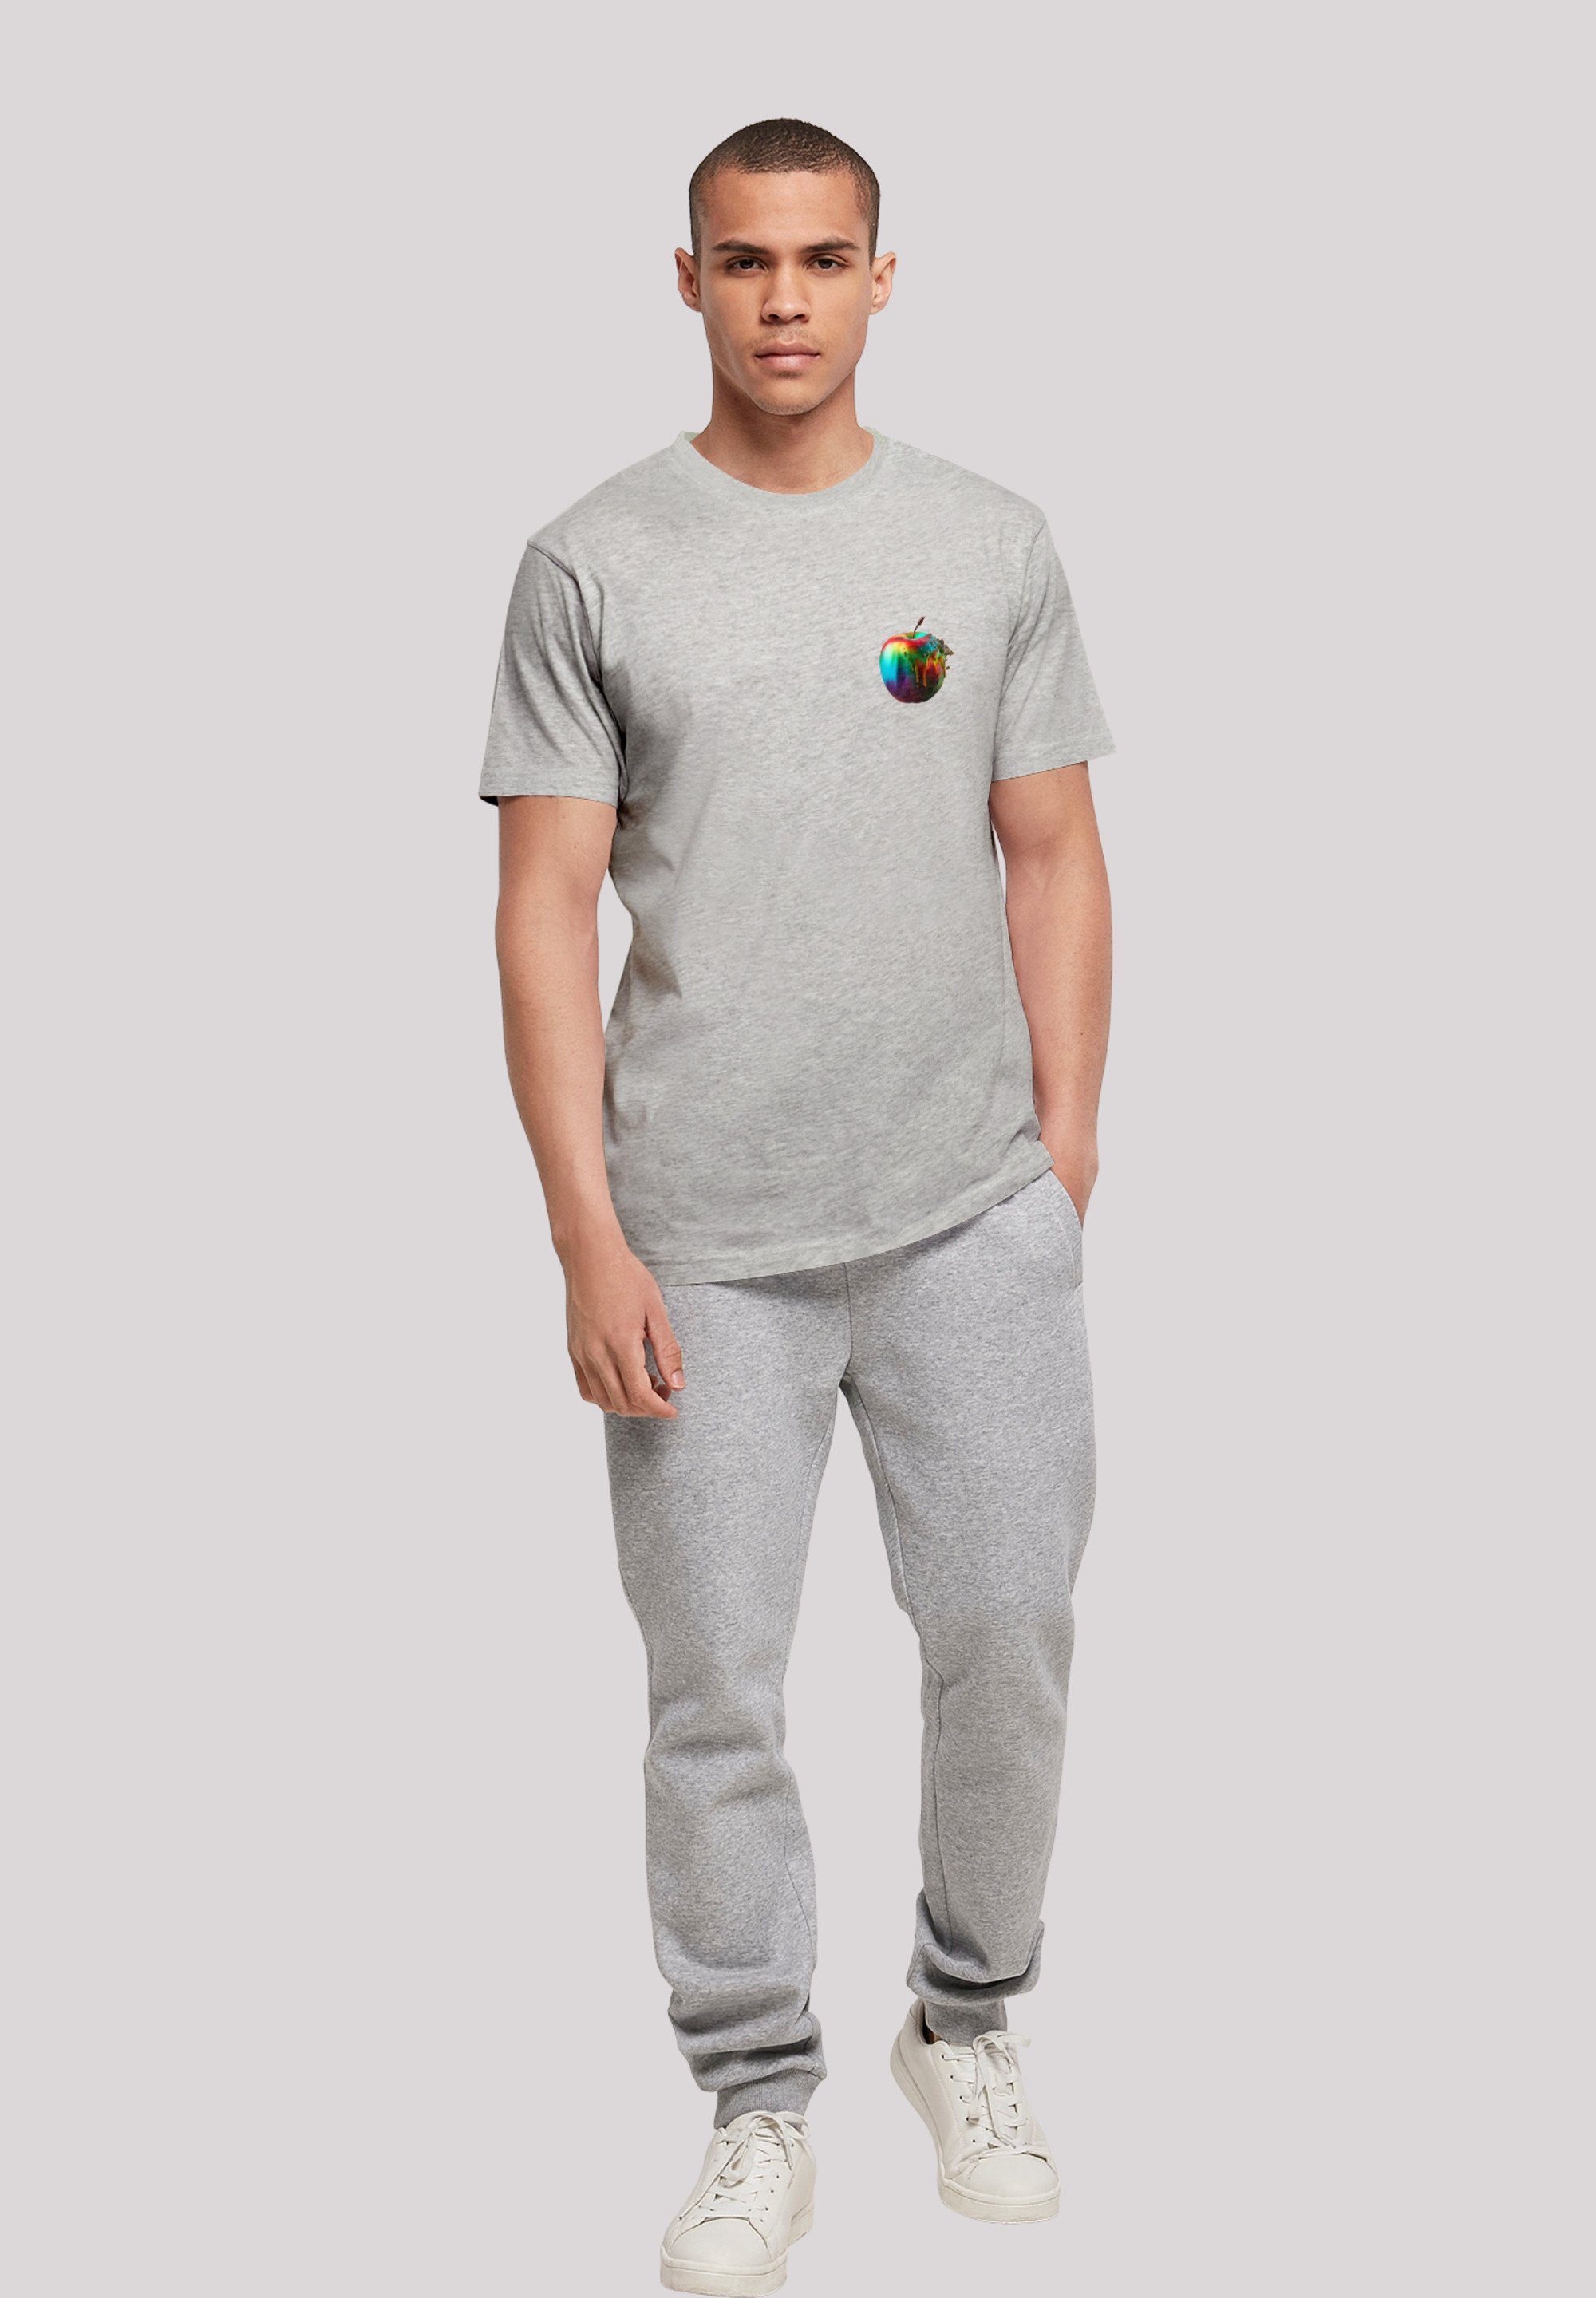 F4NT4STIC T-Shirt Colorfood Collection Apple Print grey - Rainbow heather